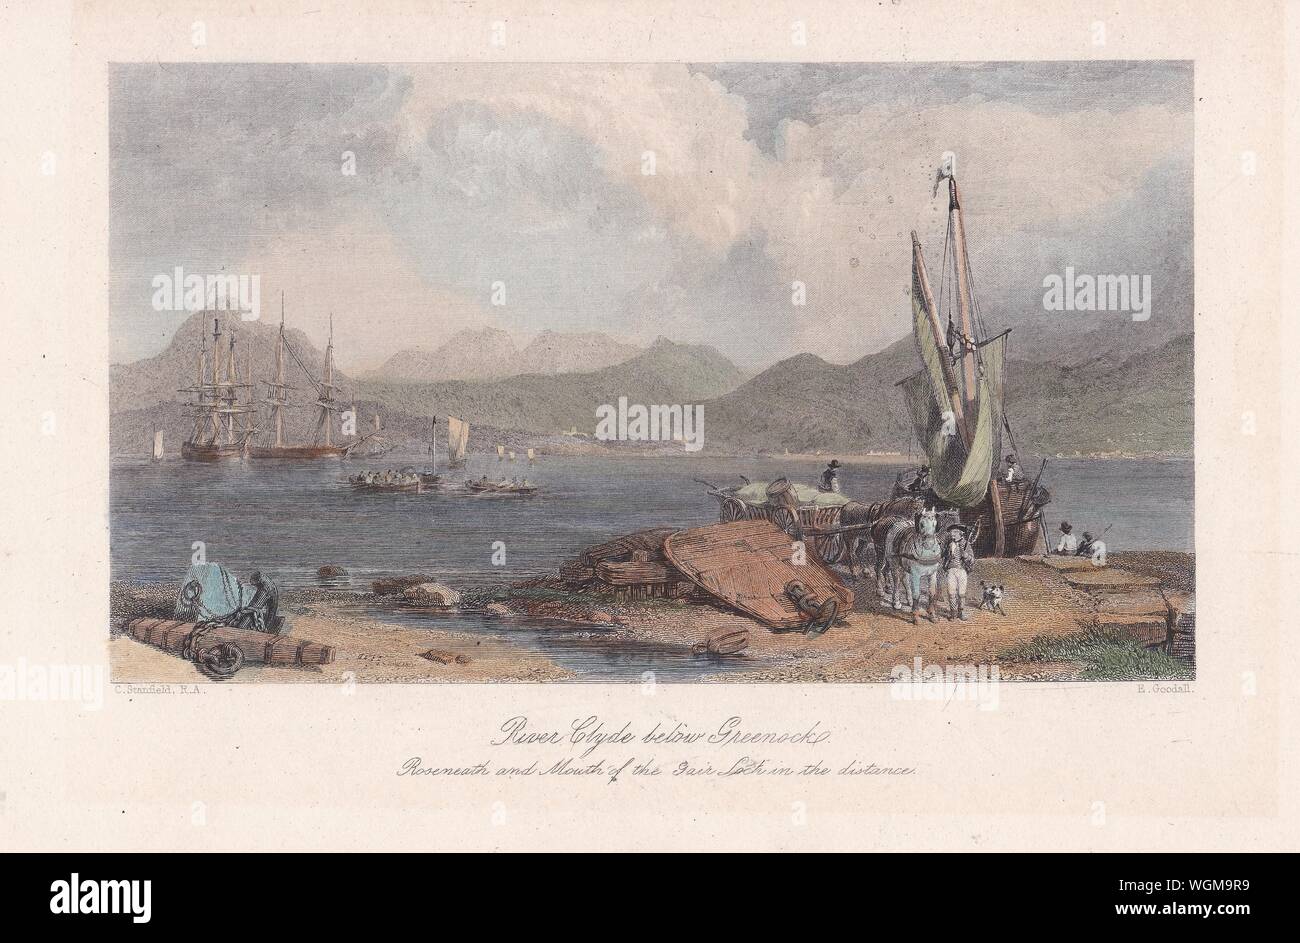 Book plate / print of 'River Clyde below Greenock, Rosemeath and mouth of the Gair Lock in the distance'. Stock Photo